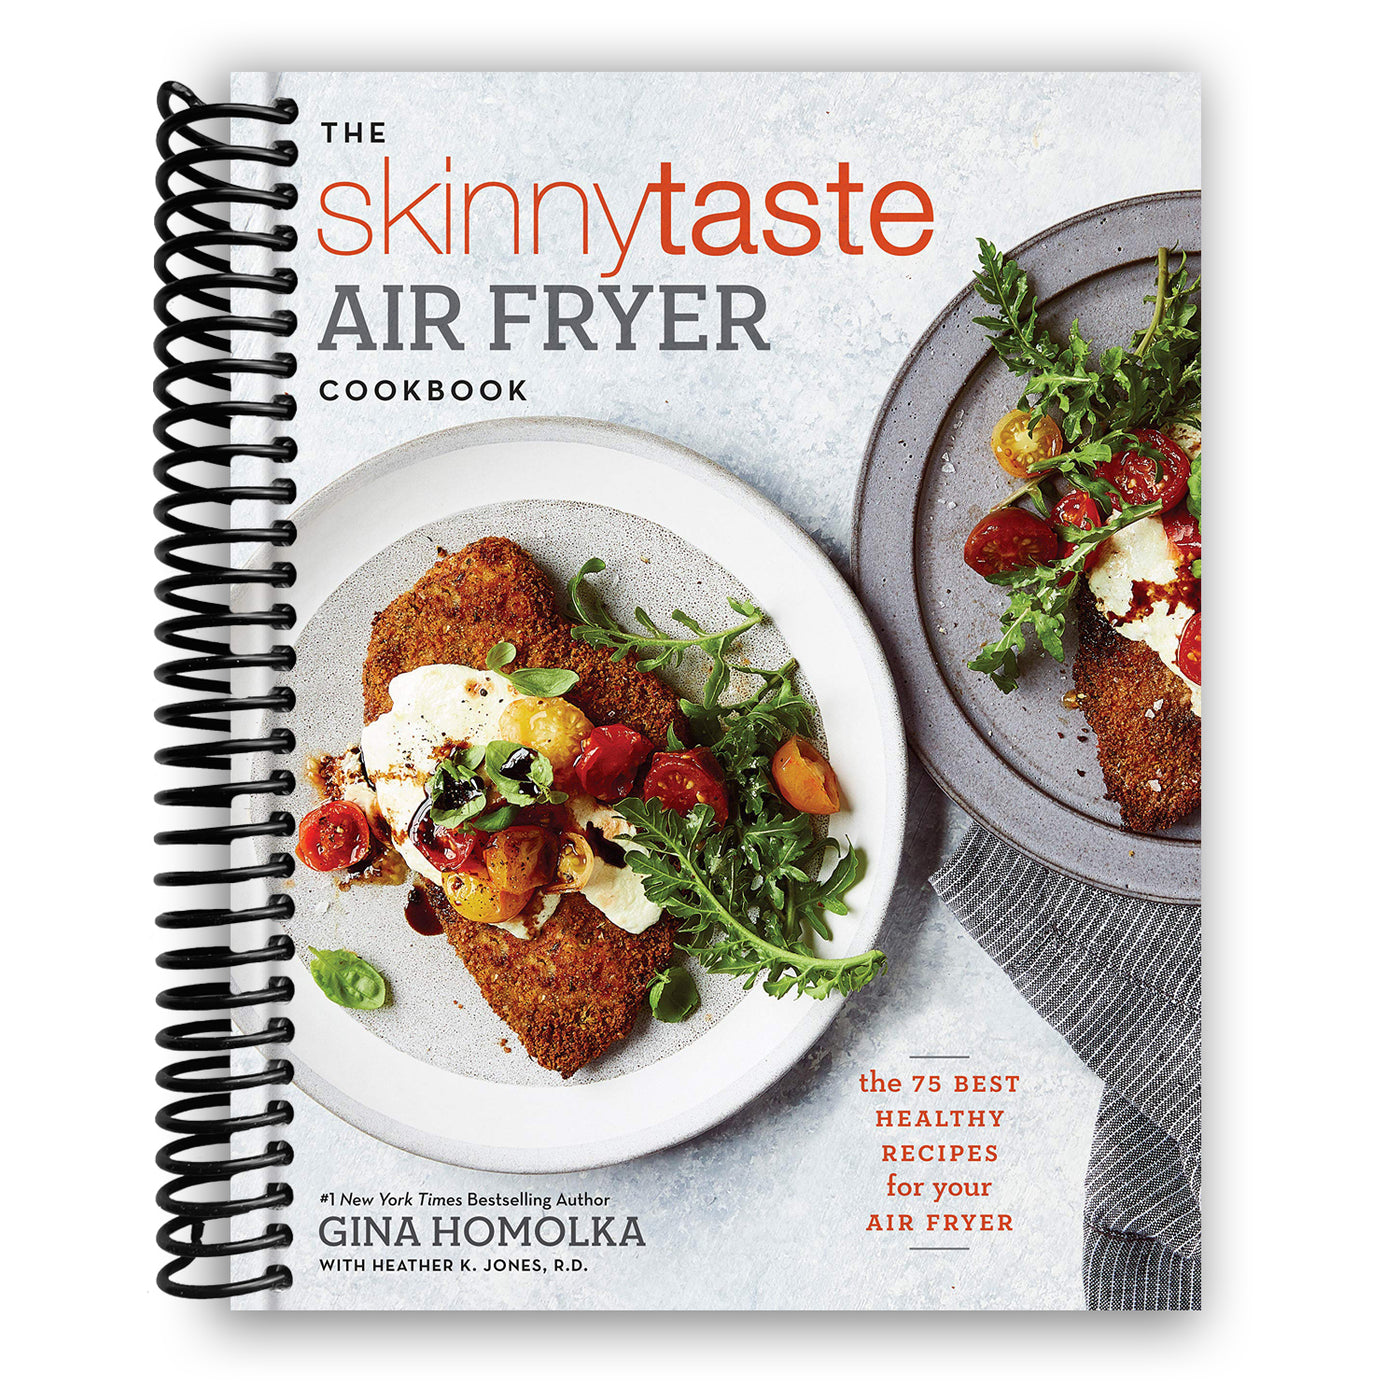 The Skinnytaste Air Fryer Cookbook: The 75 Best Healthy Recipes for Your Air Fryer (Spiral Bound)